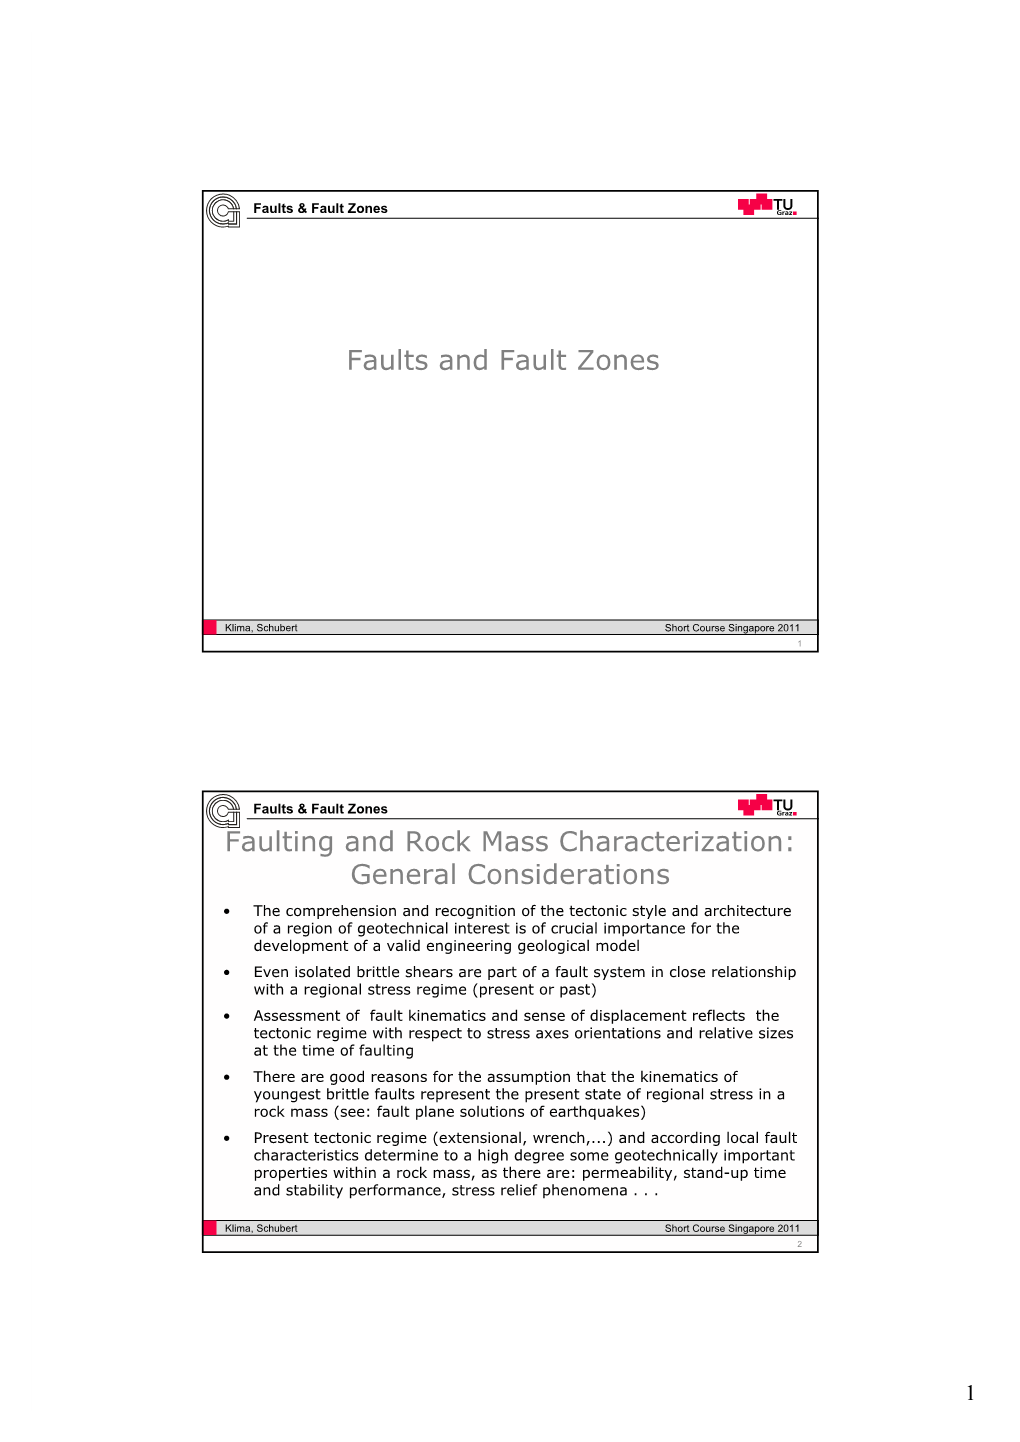 Faults and Fault Zones Faulting and Rock Mass Characterization